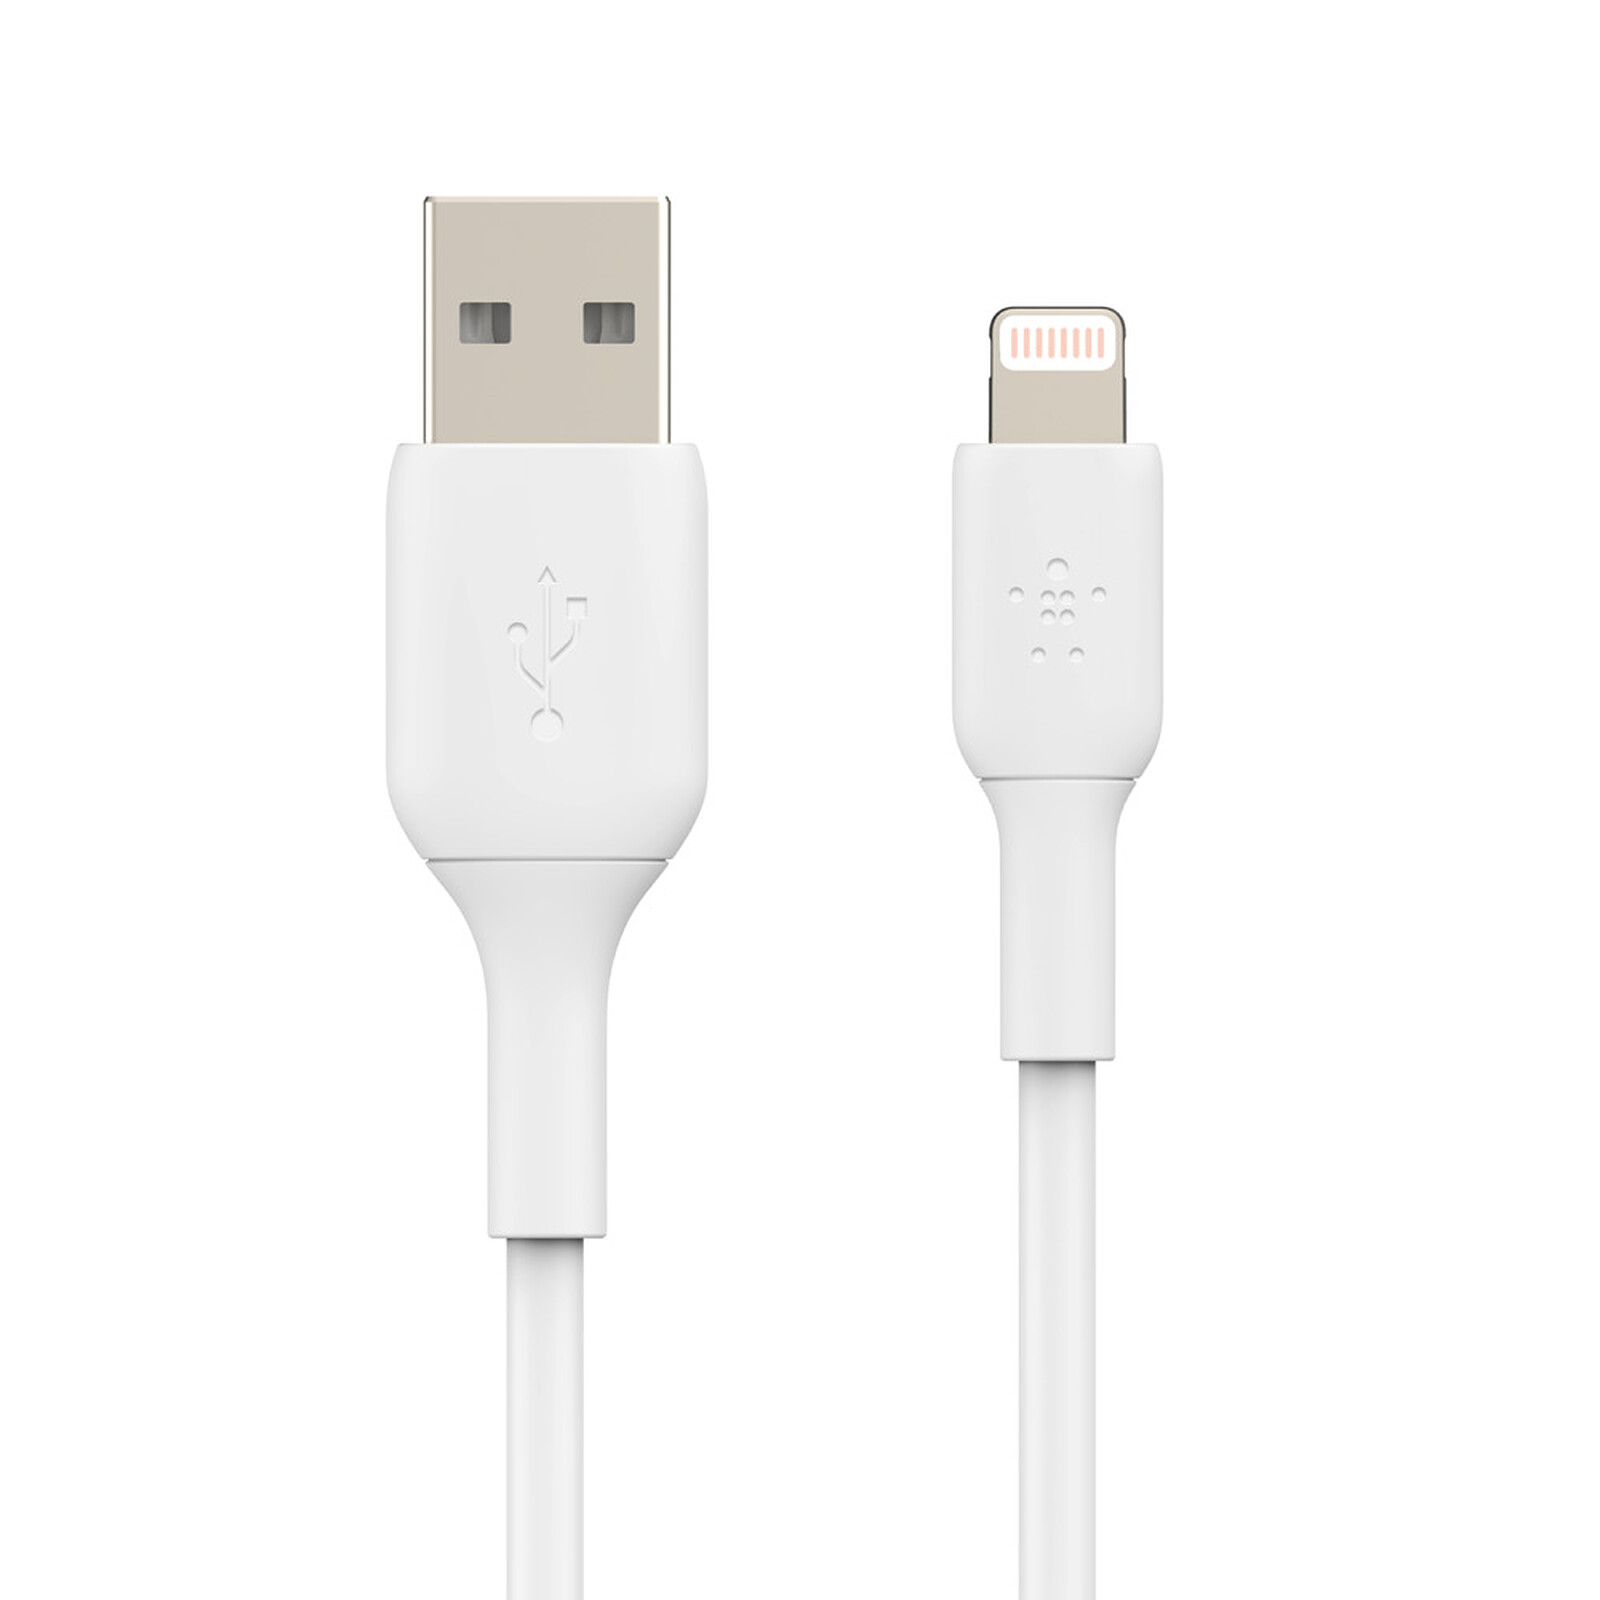 Apple Cable Lightning a Jack 3,5 mm - Accesorios Apple - LDLC